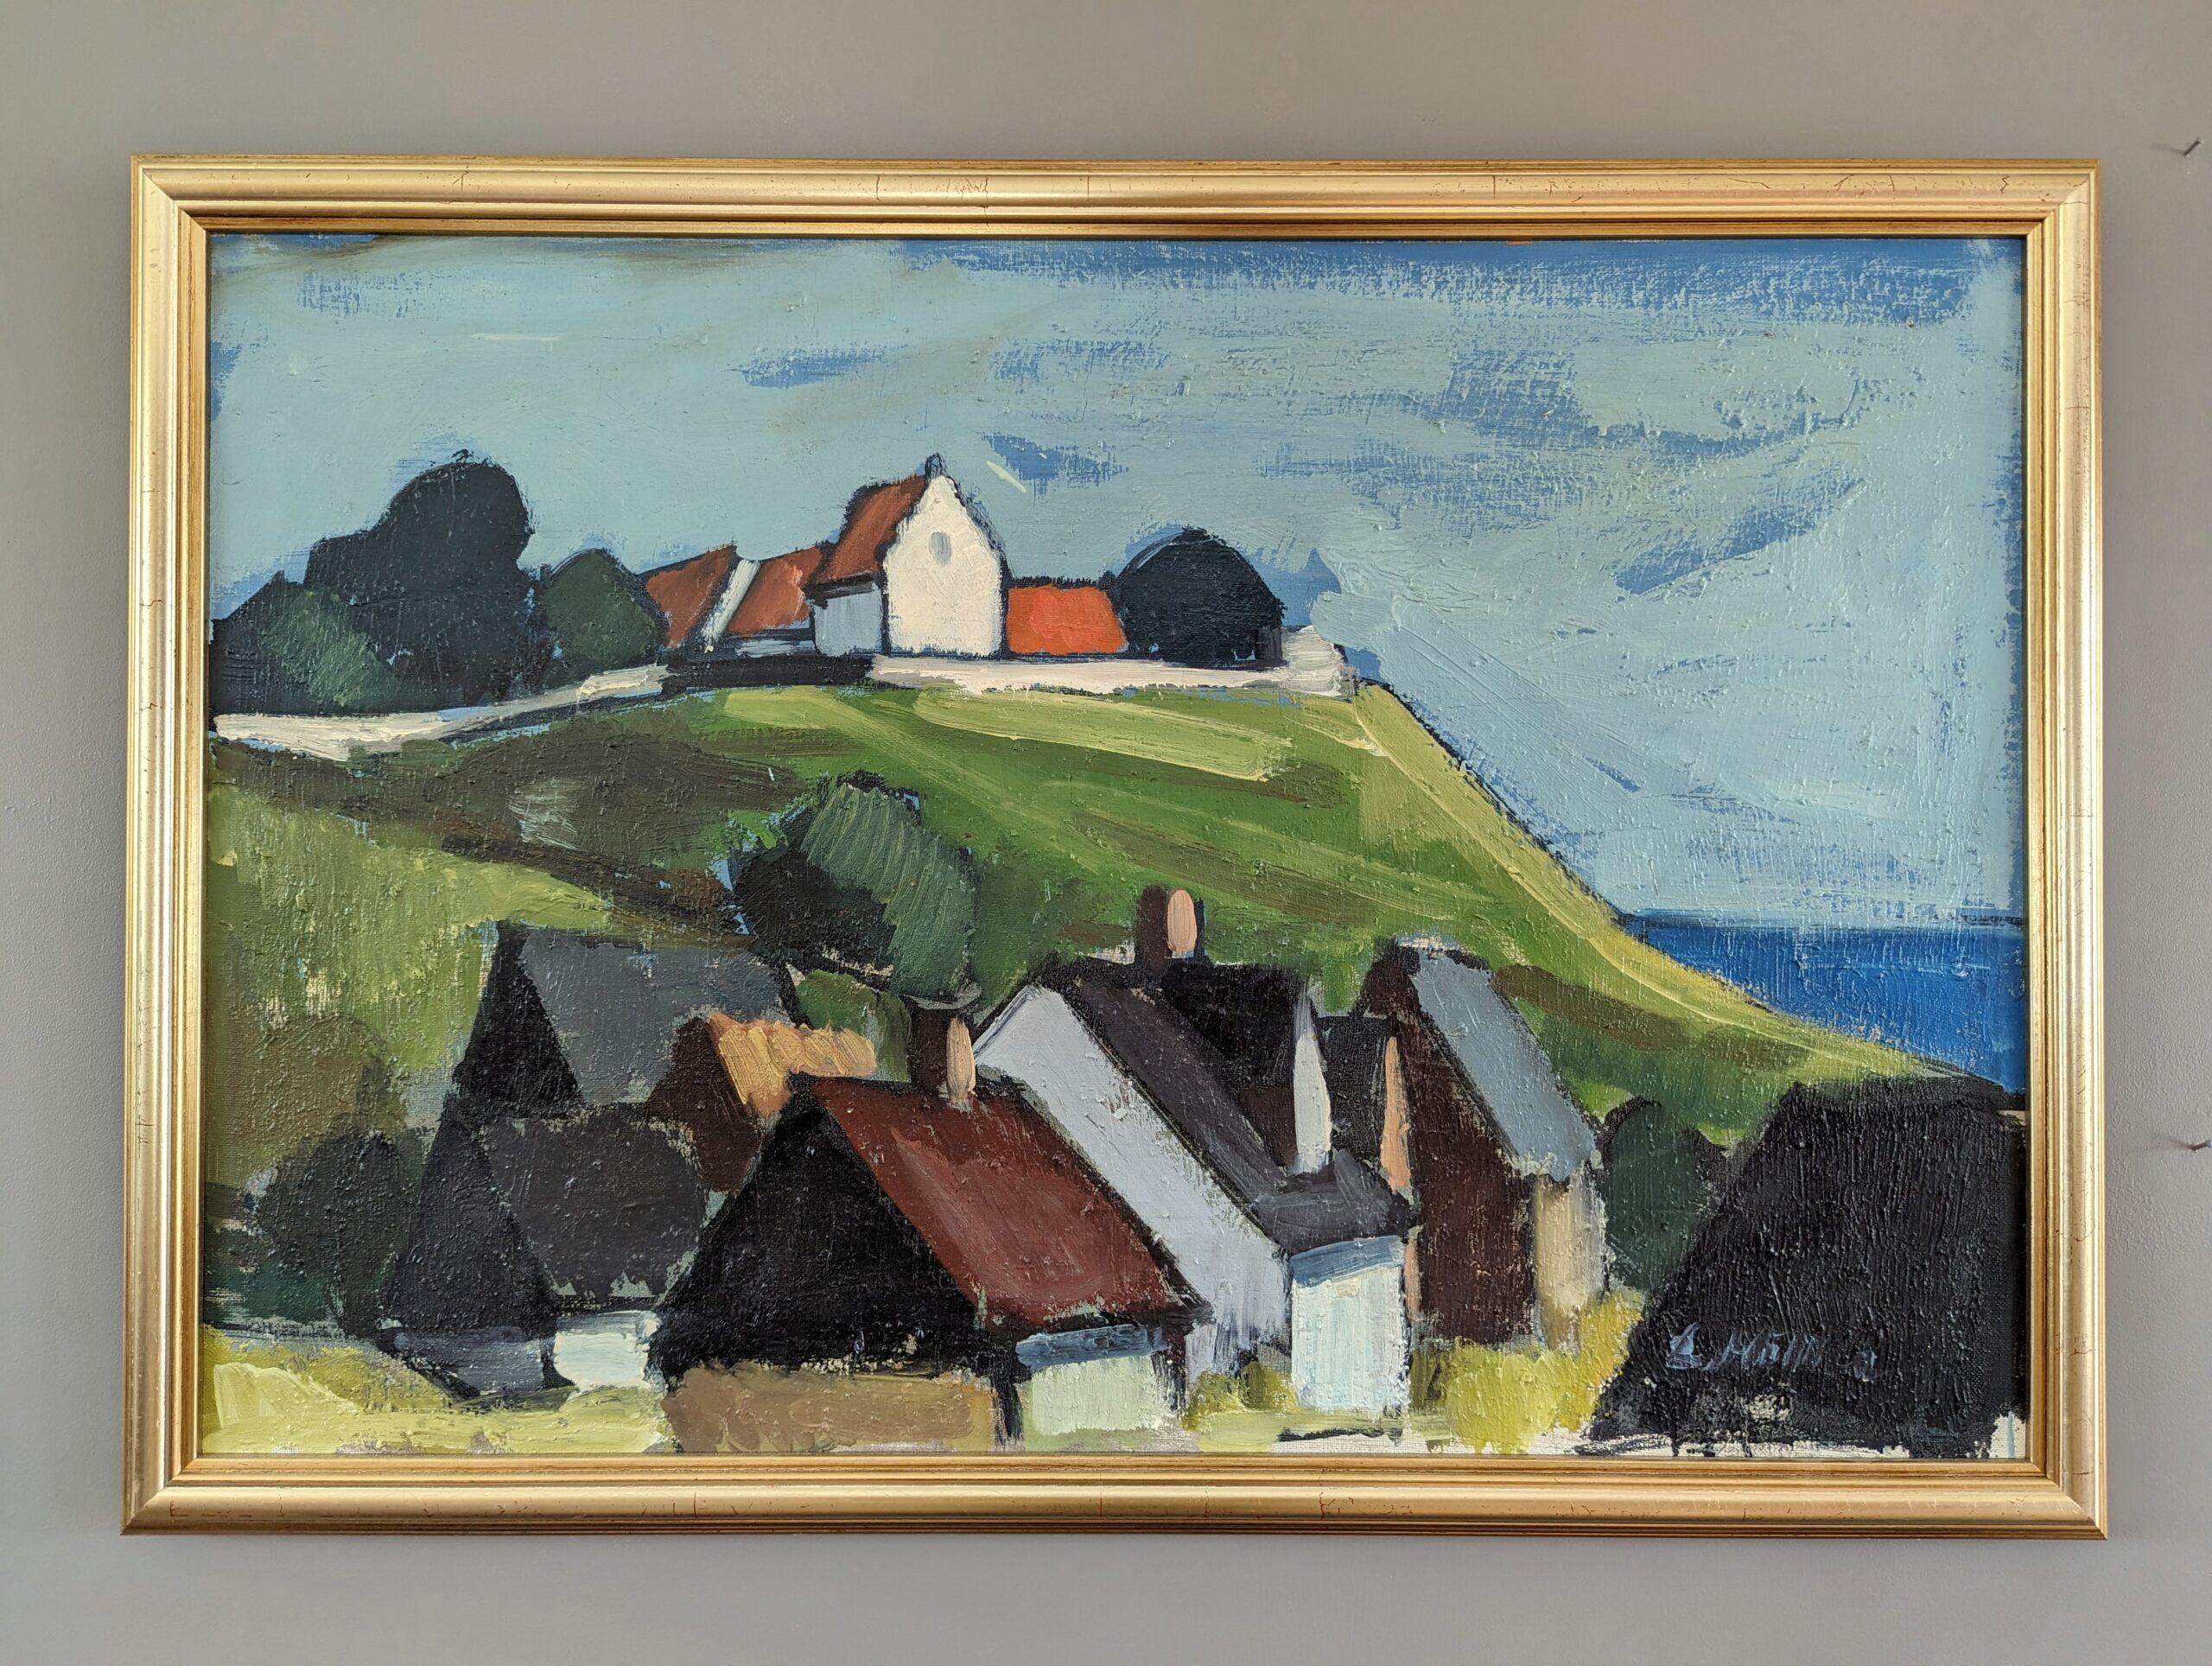 COASTAL LIVING
Size: 51 x 72.5 cm (including frame)
Oil on Canvas

A vibrant and inviting mid-century coastal landscape composition, executed in oil onto canvas.

The painting captures a scenic view of a lush hilltop adorned with charming houses and